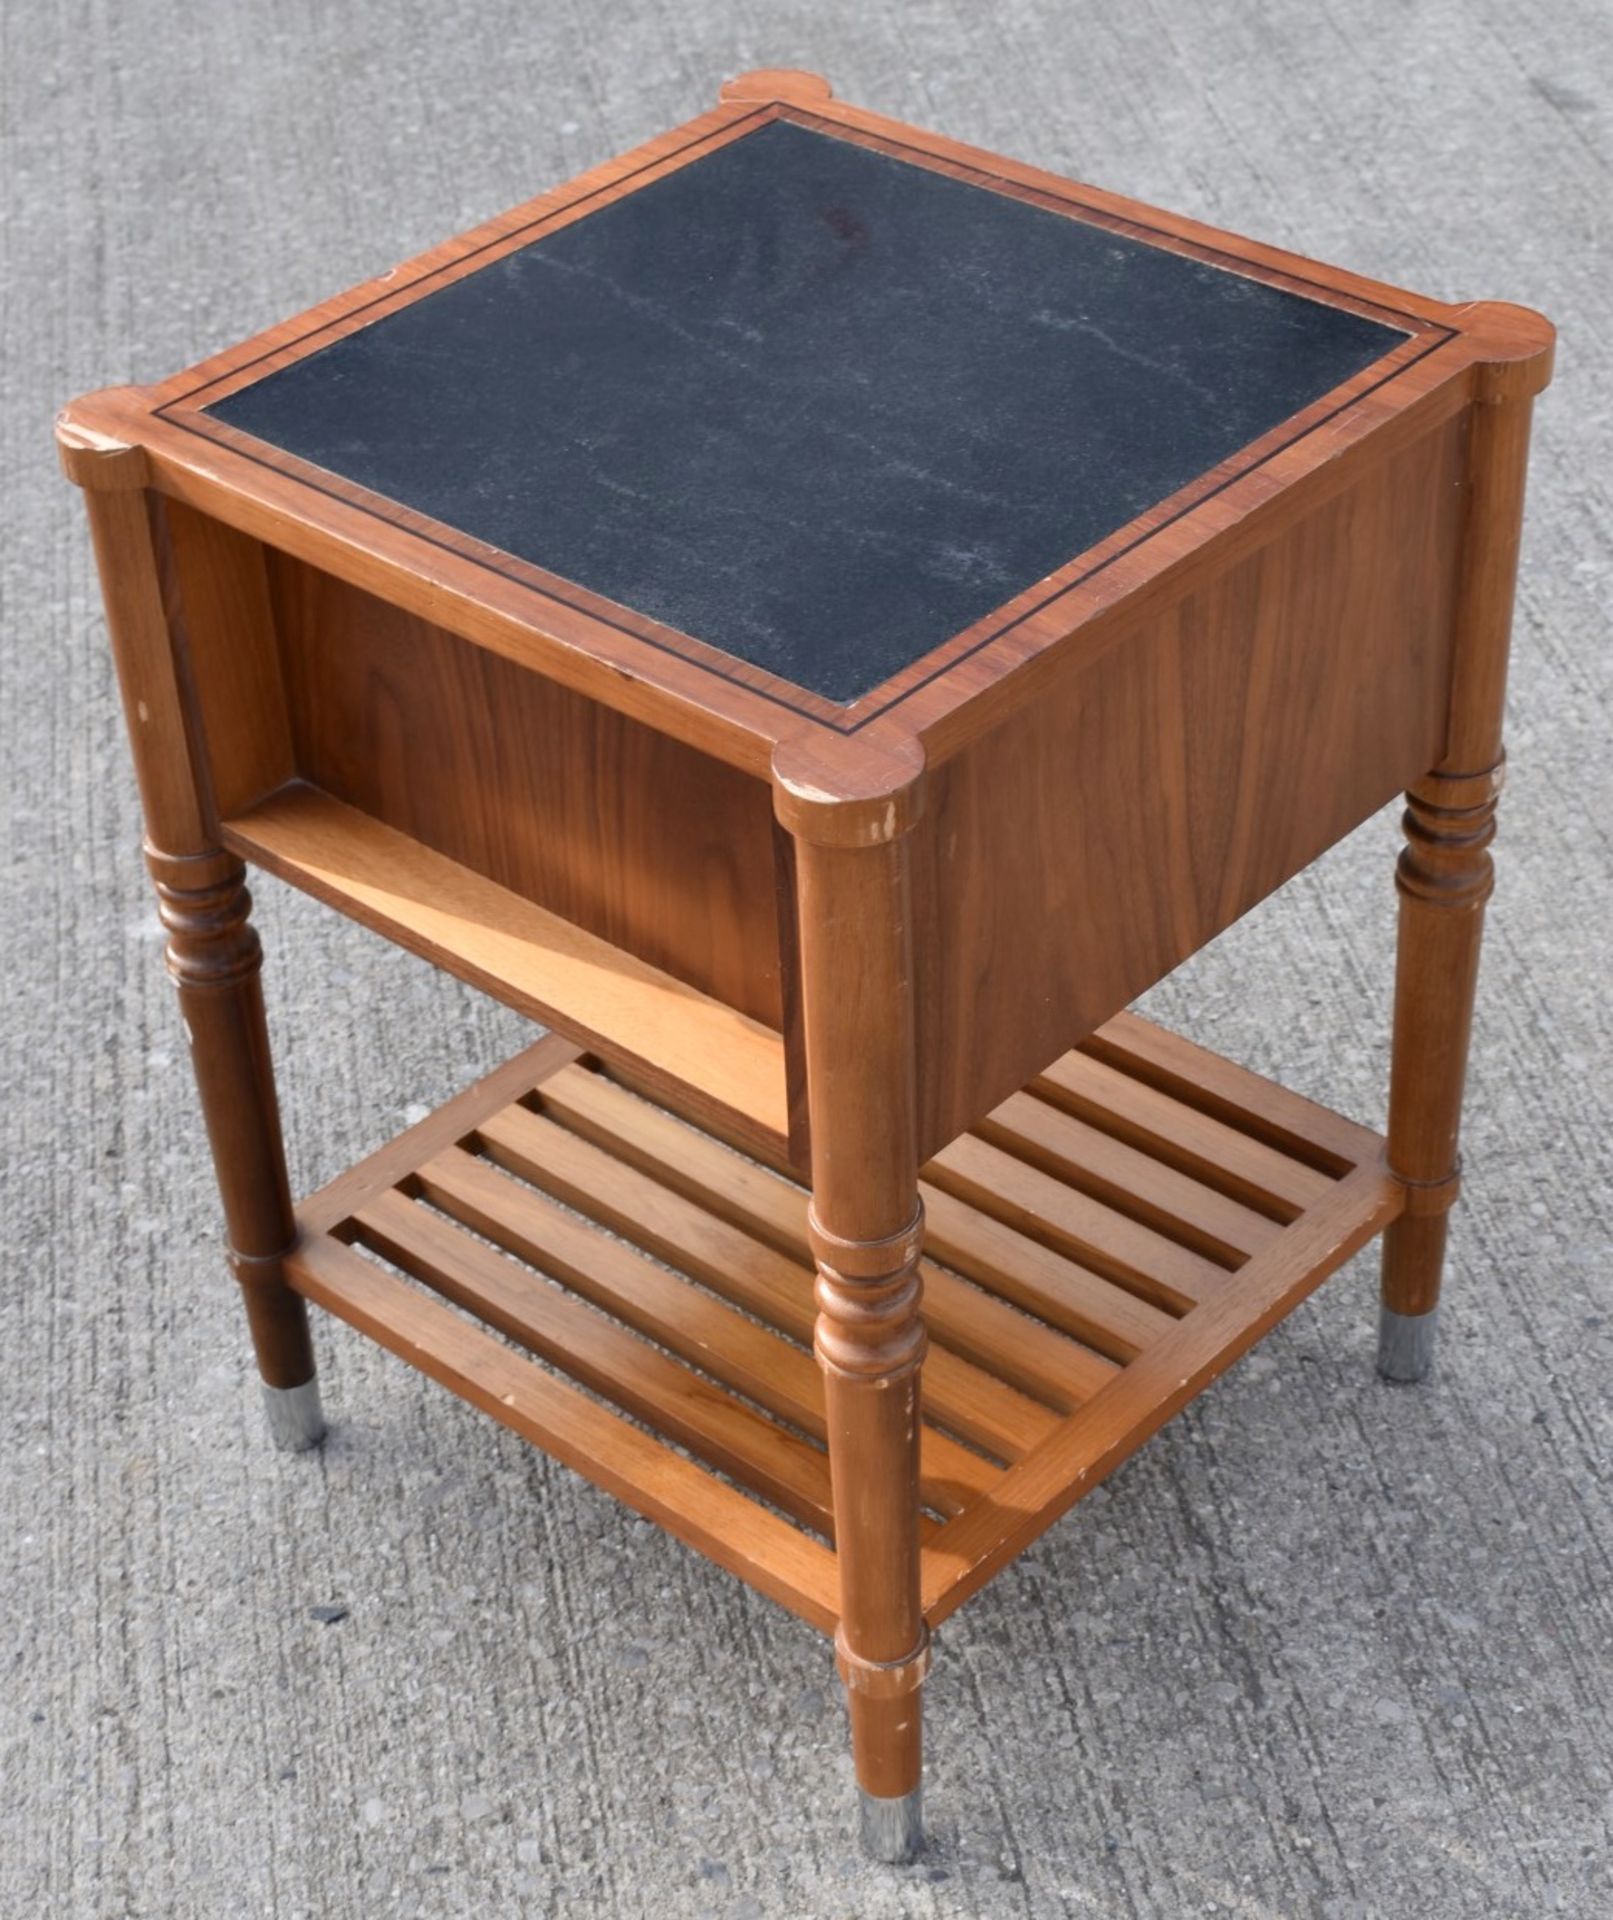 1 x CHANNELS Classically Styled Designer Solid Wood End Table with Pull-Out Tray, 1-Drawer Storage - Image 2 of 6